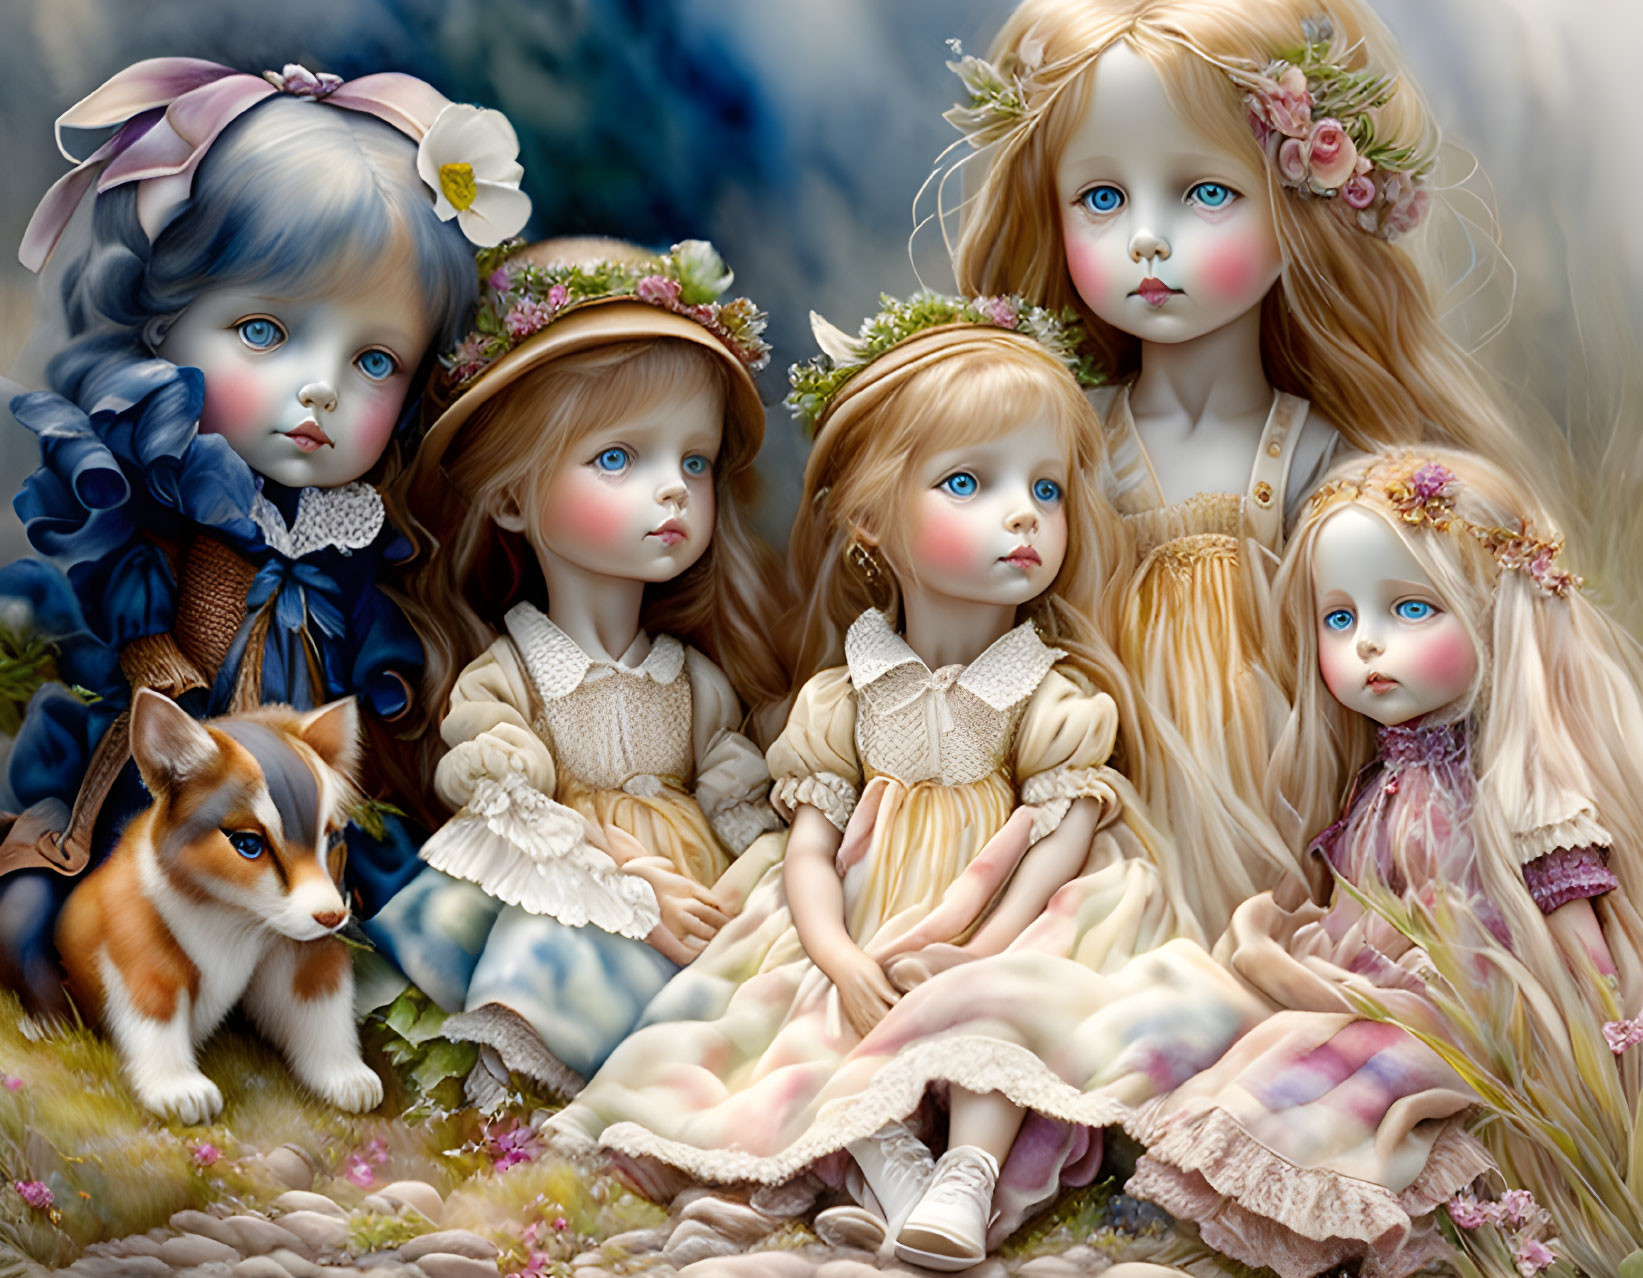 Four porcelain dolls with big eyes and floral wreaths beside a corgi dog in a dreamy